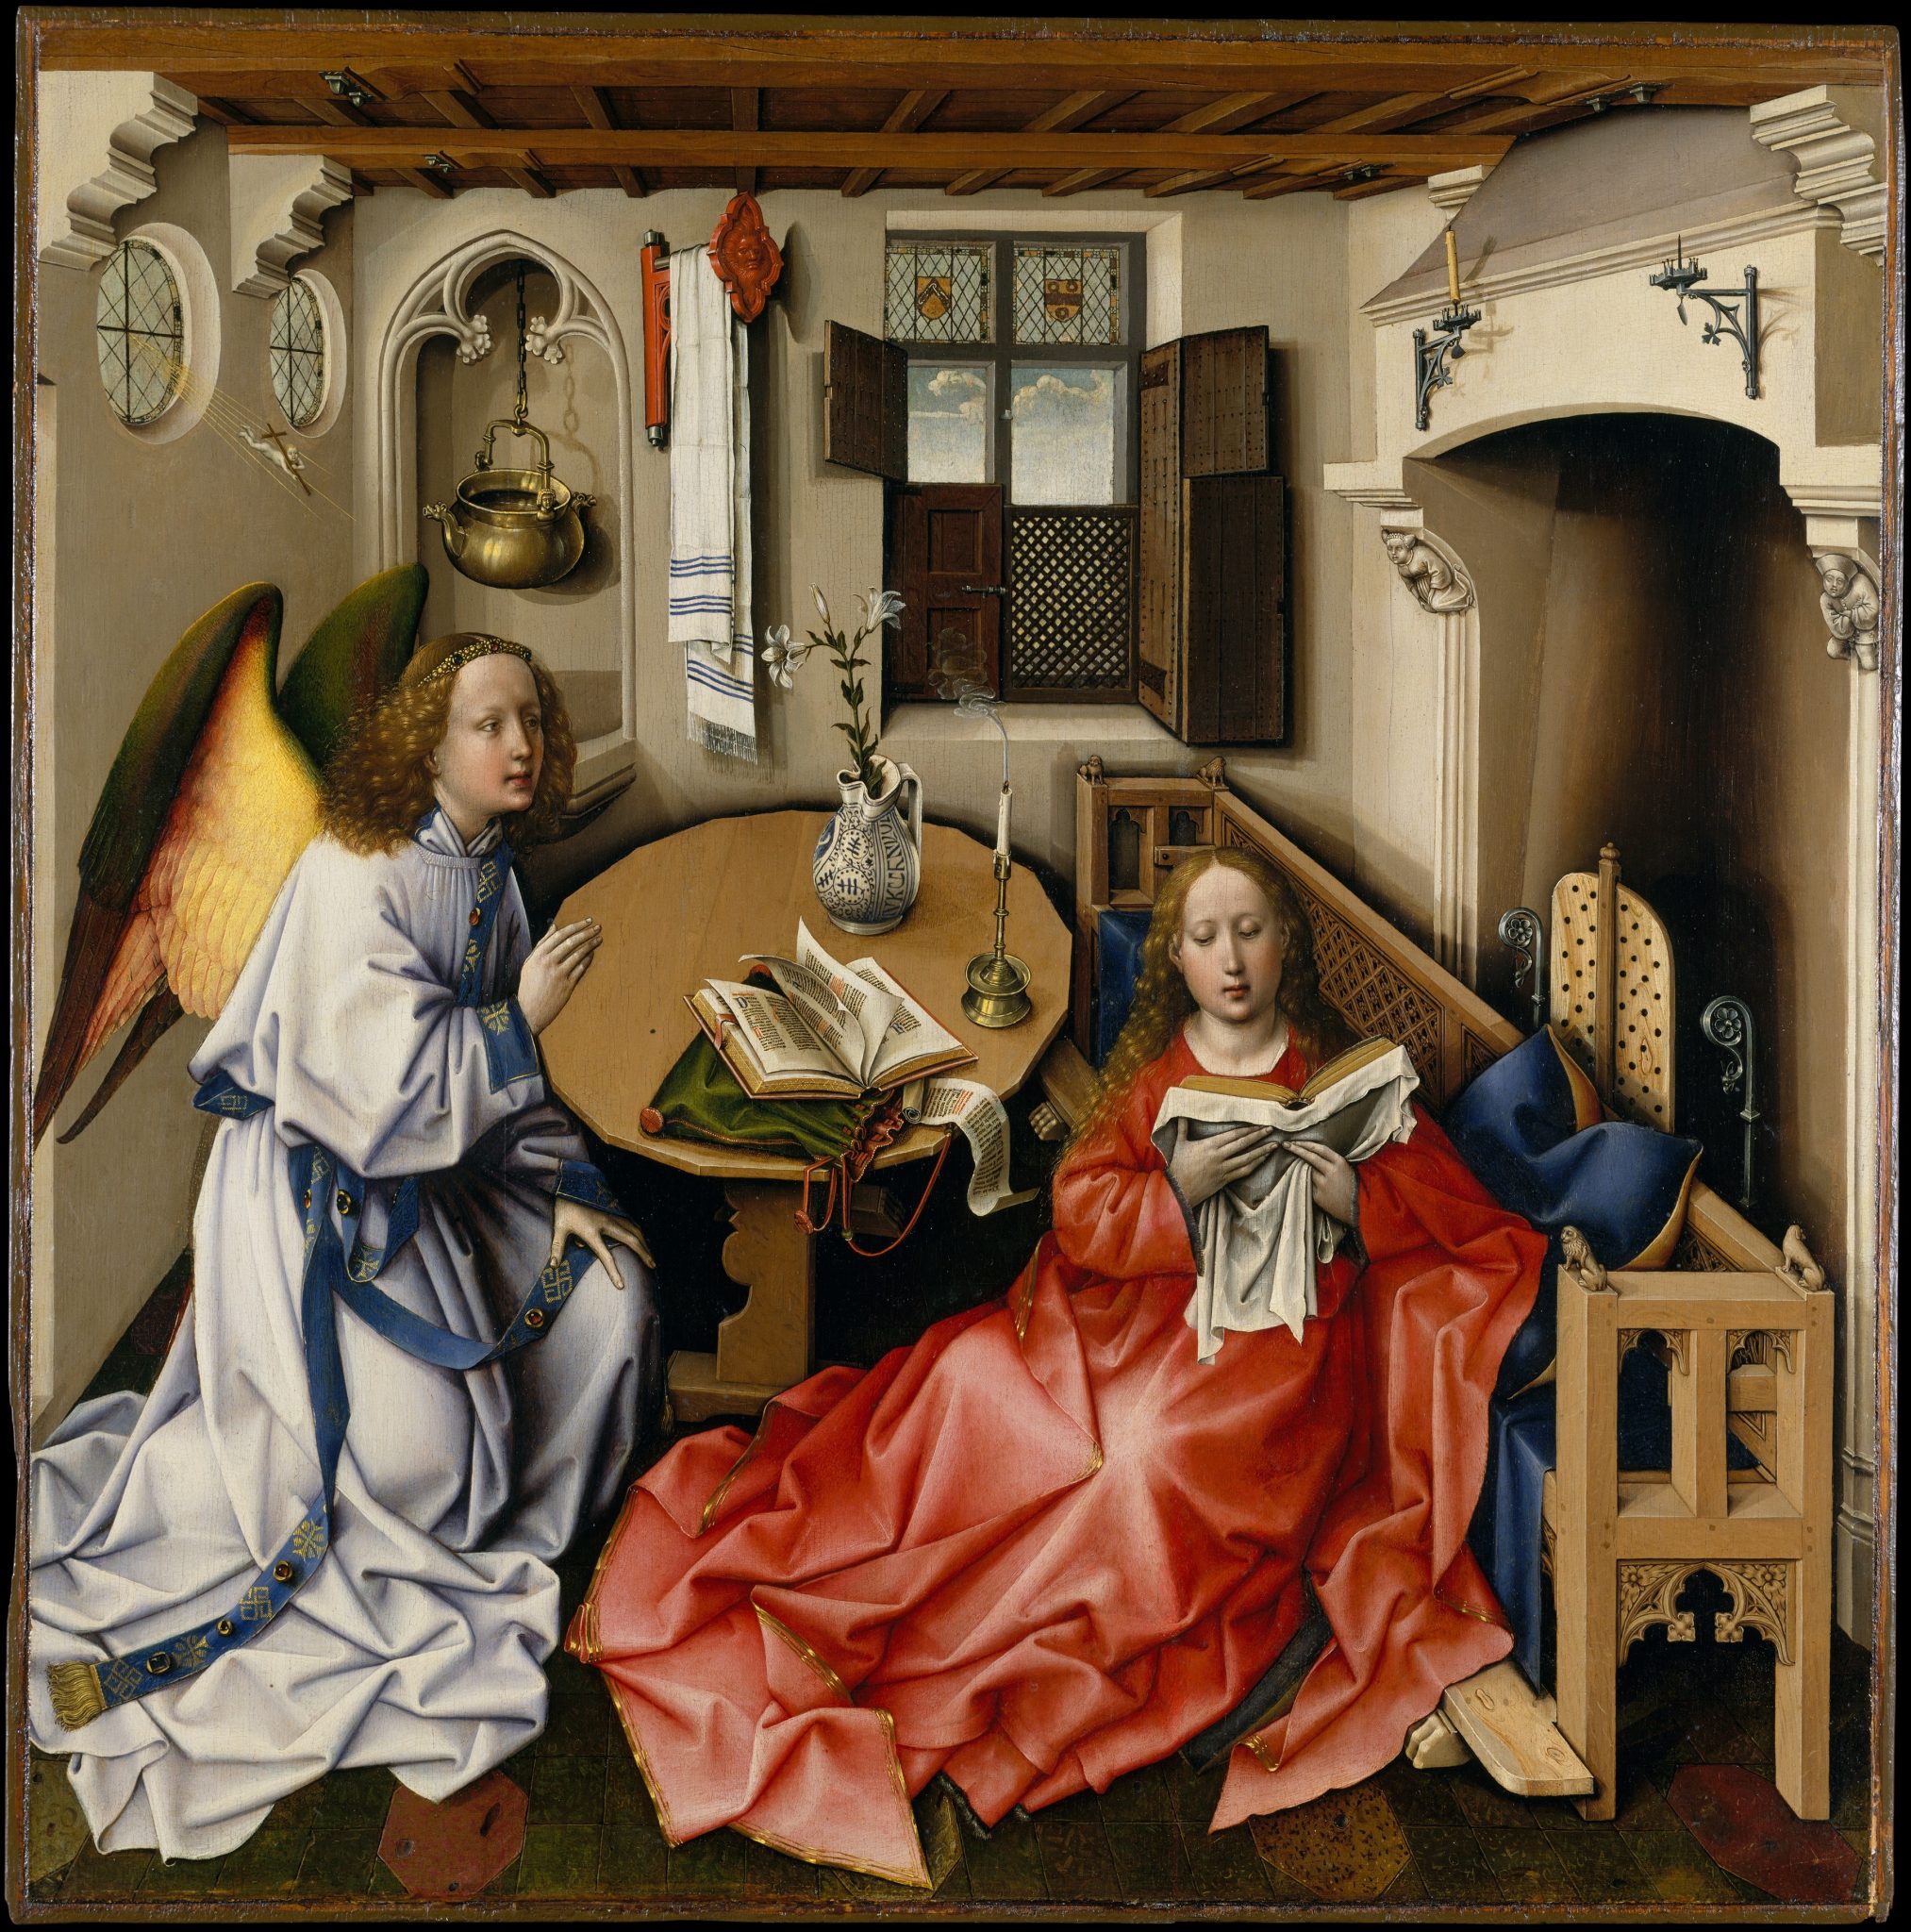 Choices and Intentions in the Mérode Altarpiece - Journal of